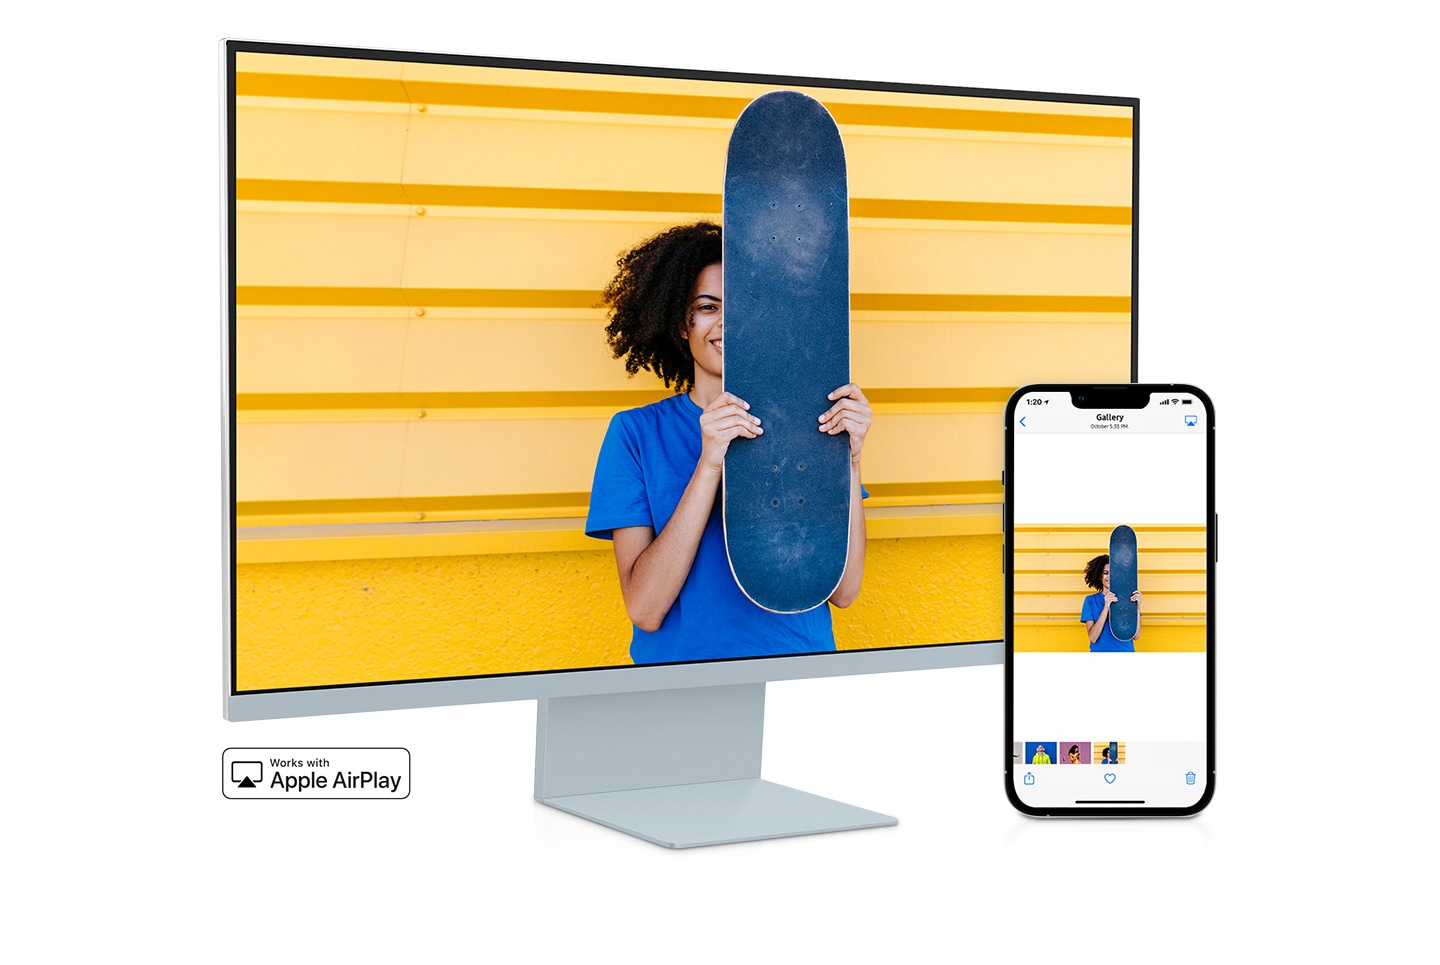 A smartphone and monitor sit side-by-side. The smartphone shows a woman posing with a skateboard. The same woman with skateboard is shown on the monitor. The smartphone's gallery app swipes through different photos which are also shown on the monitor screen.